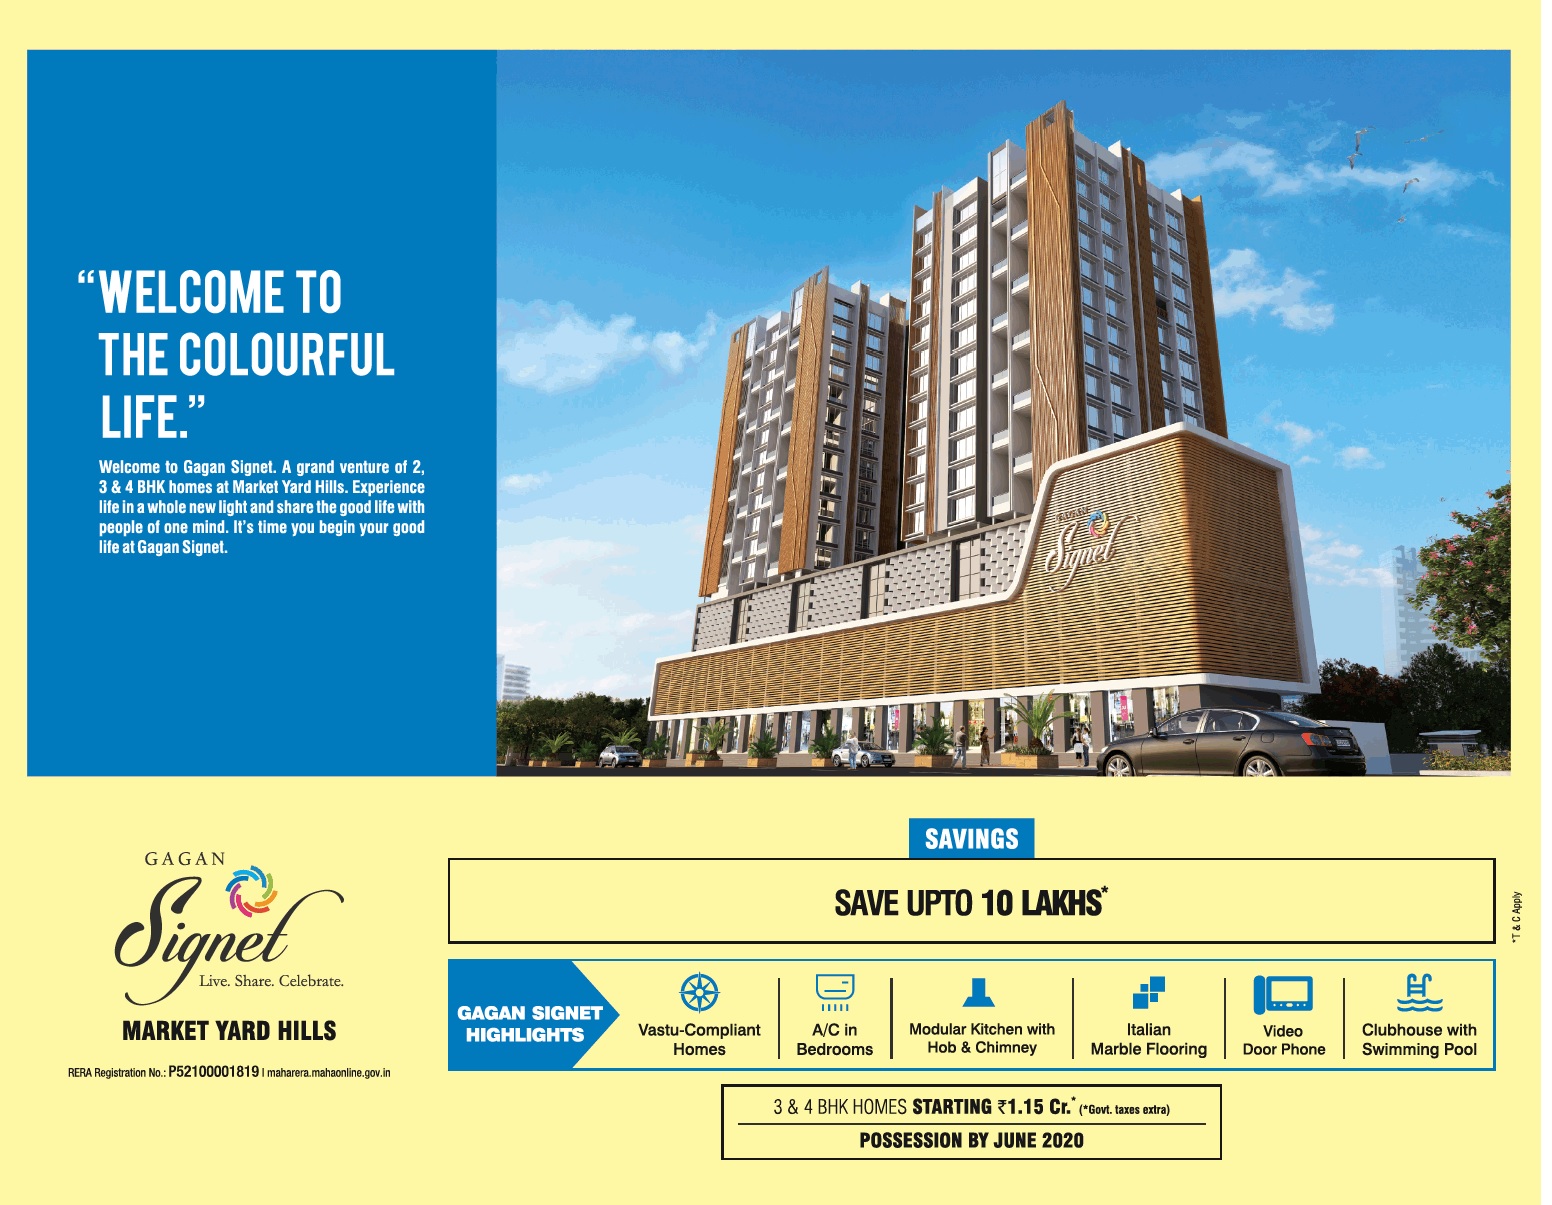 Book 3 & 4 bhk homes starting at Rs. 1.15 Cr. at Gagan Signet in Pune